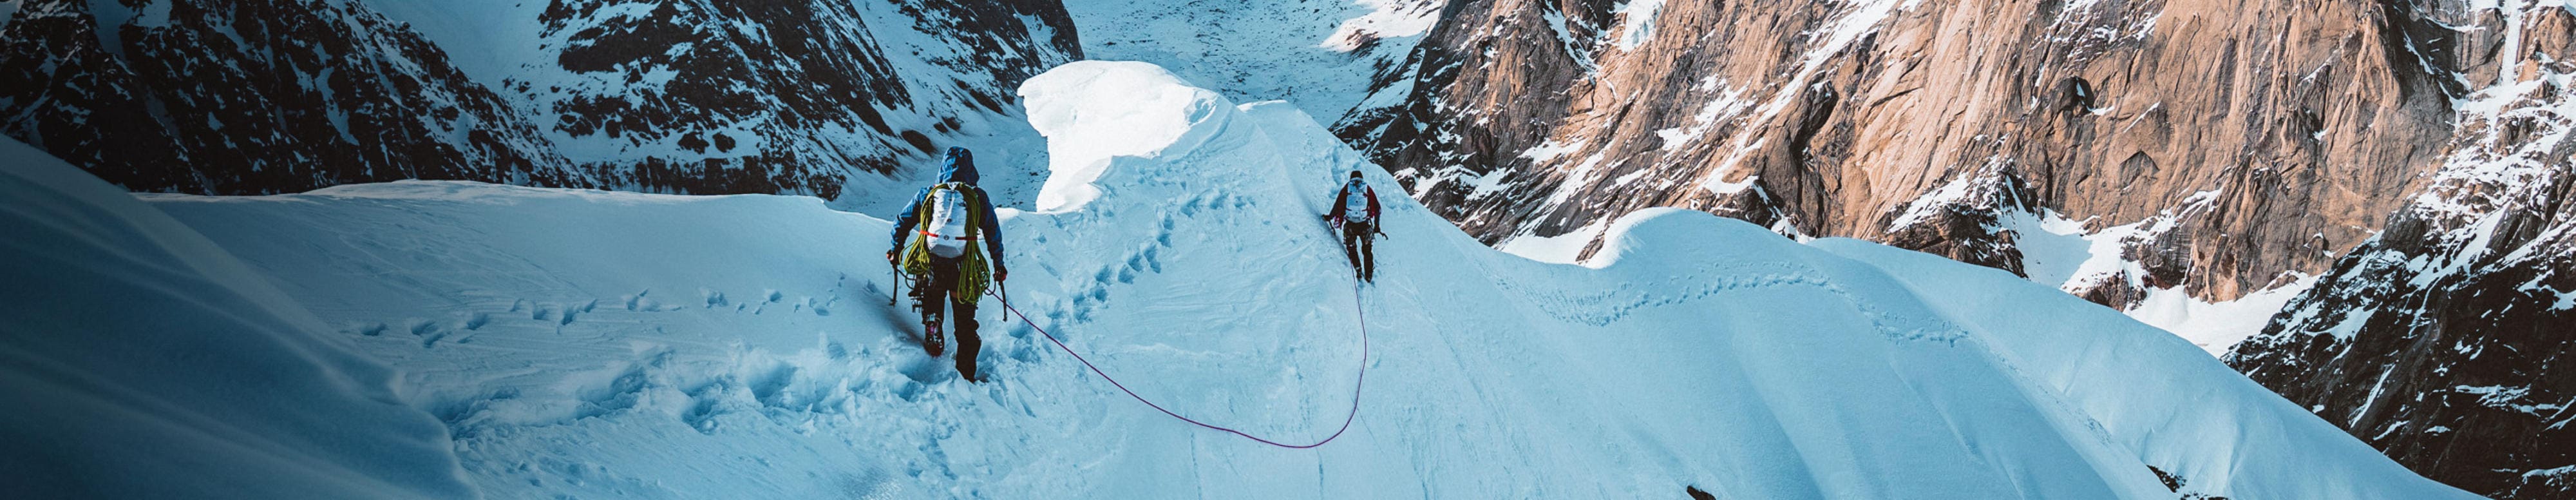 Two athletes use ropes to hike a mountain in the snow.